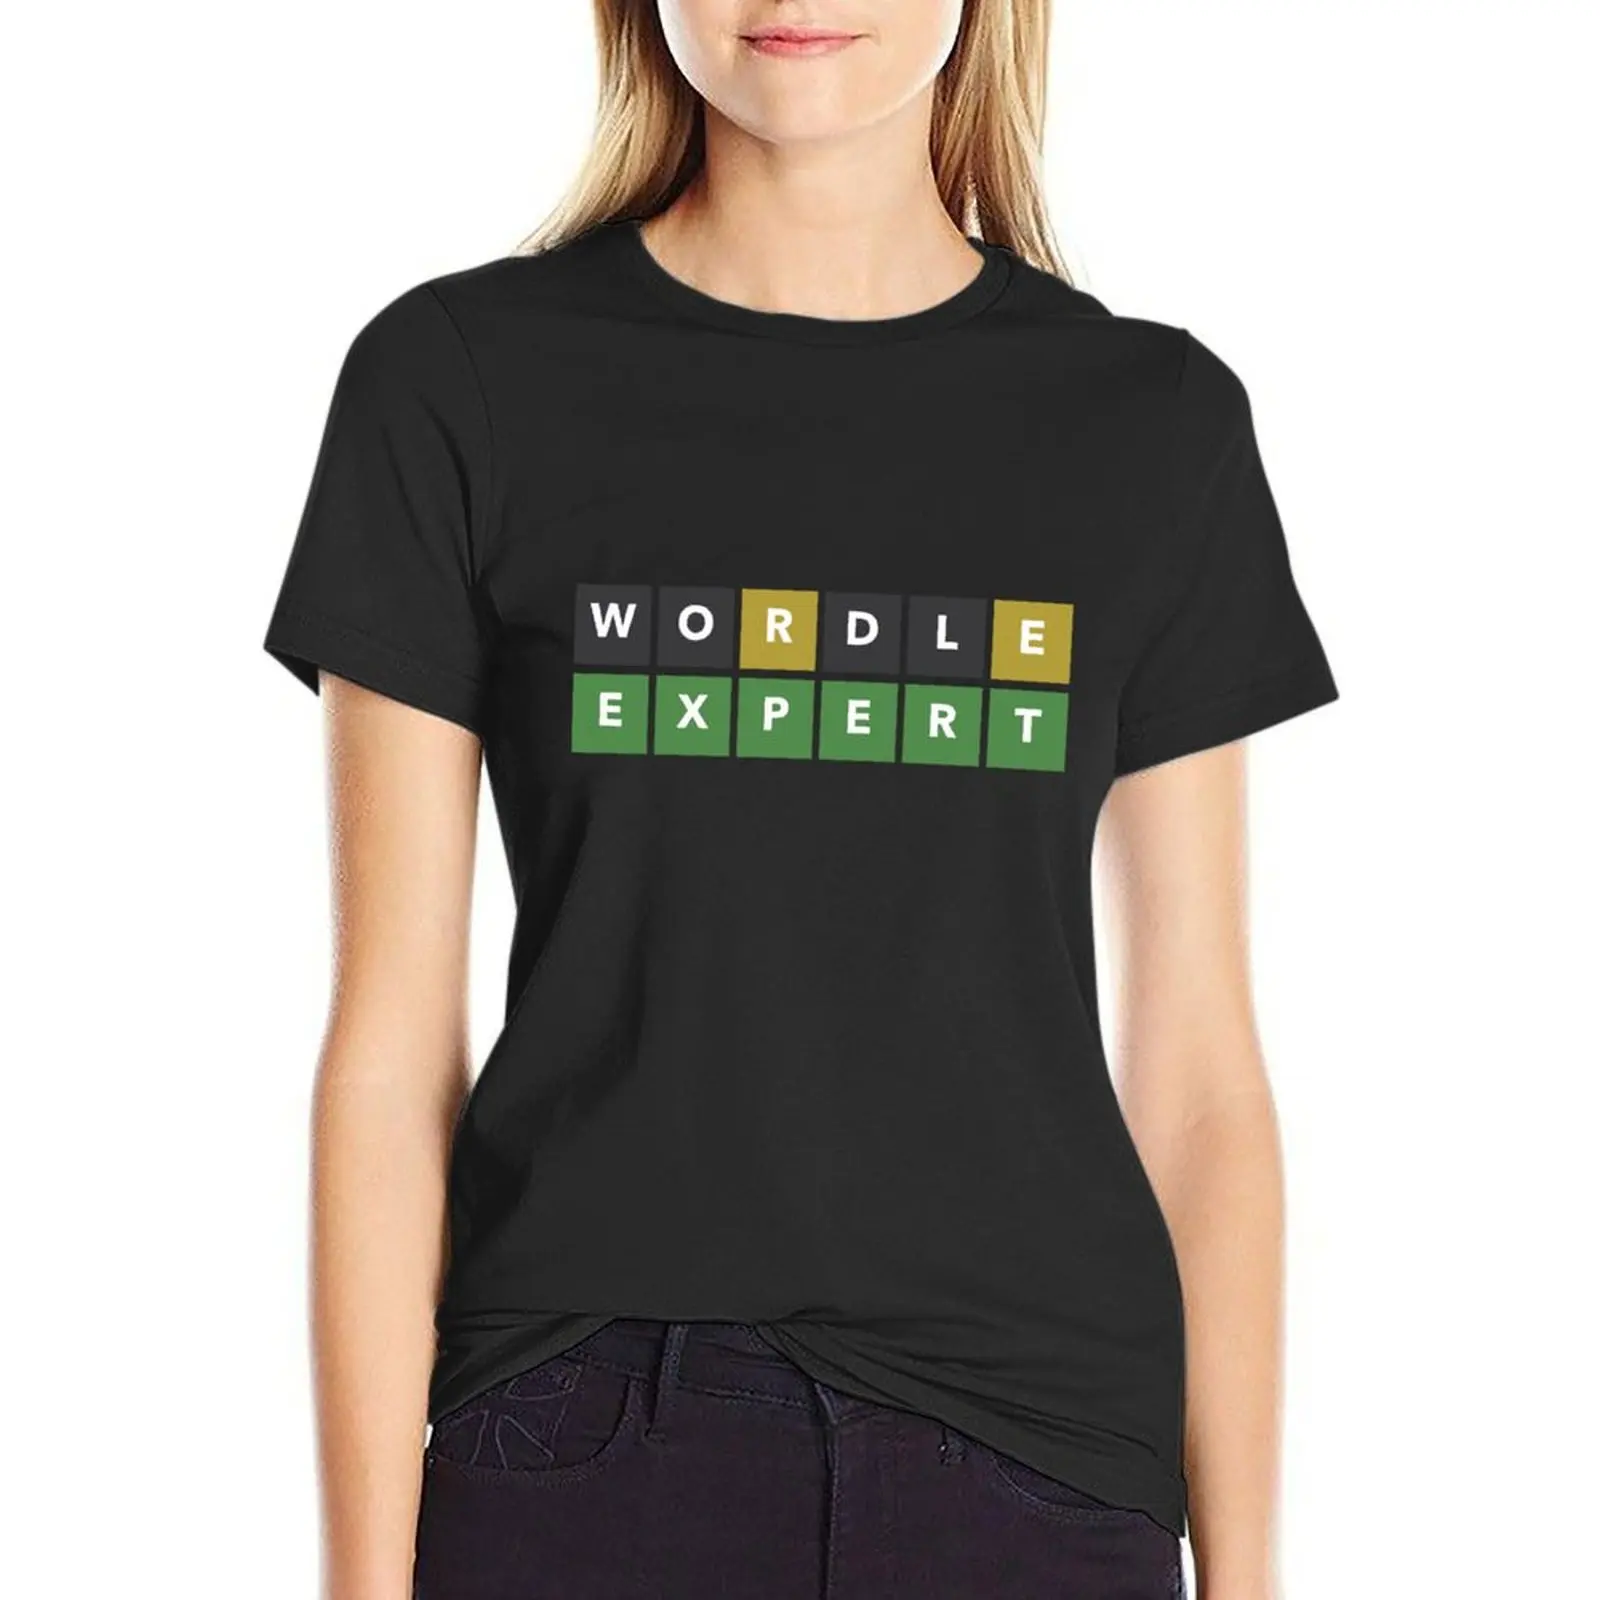 

Wordle Expert Style T-shirt Blouse vintage clothes t-shirts for Women graphic tees funny